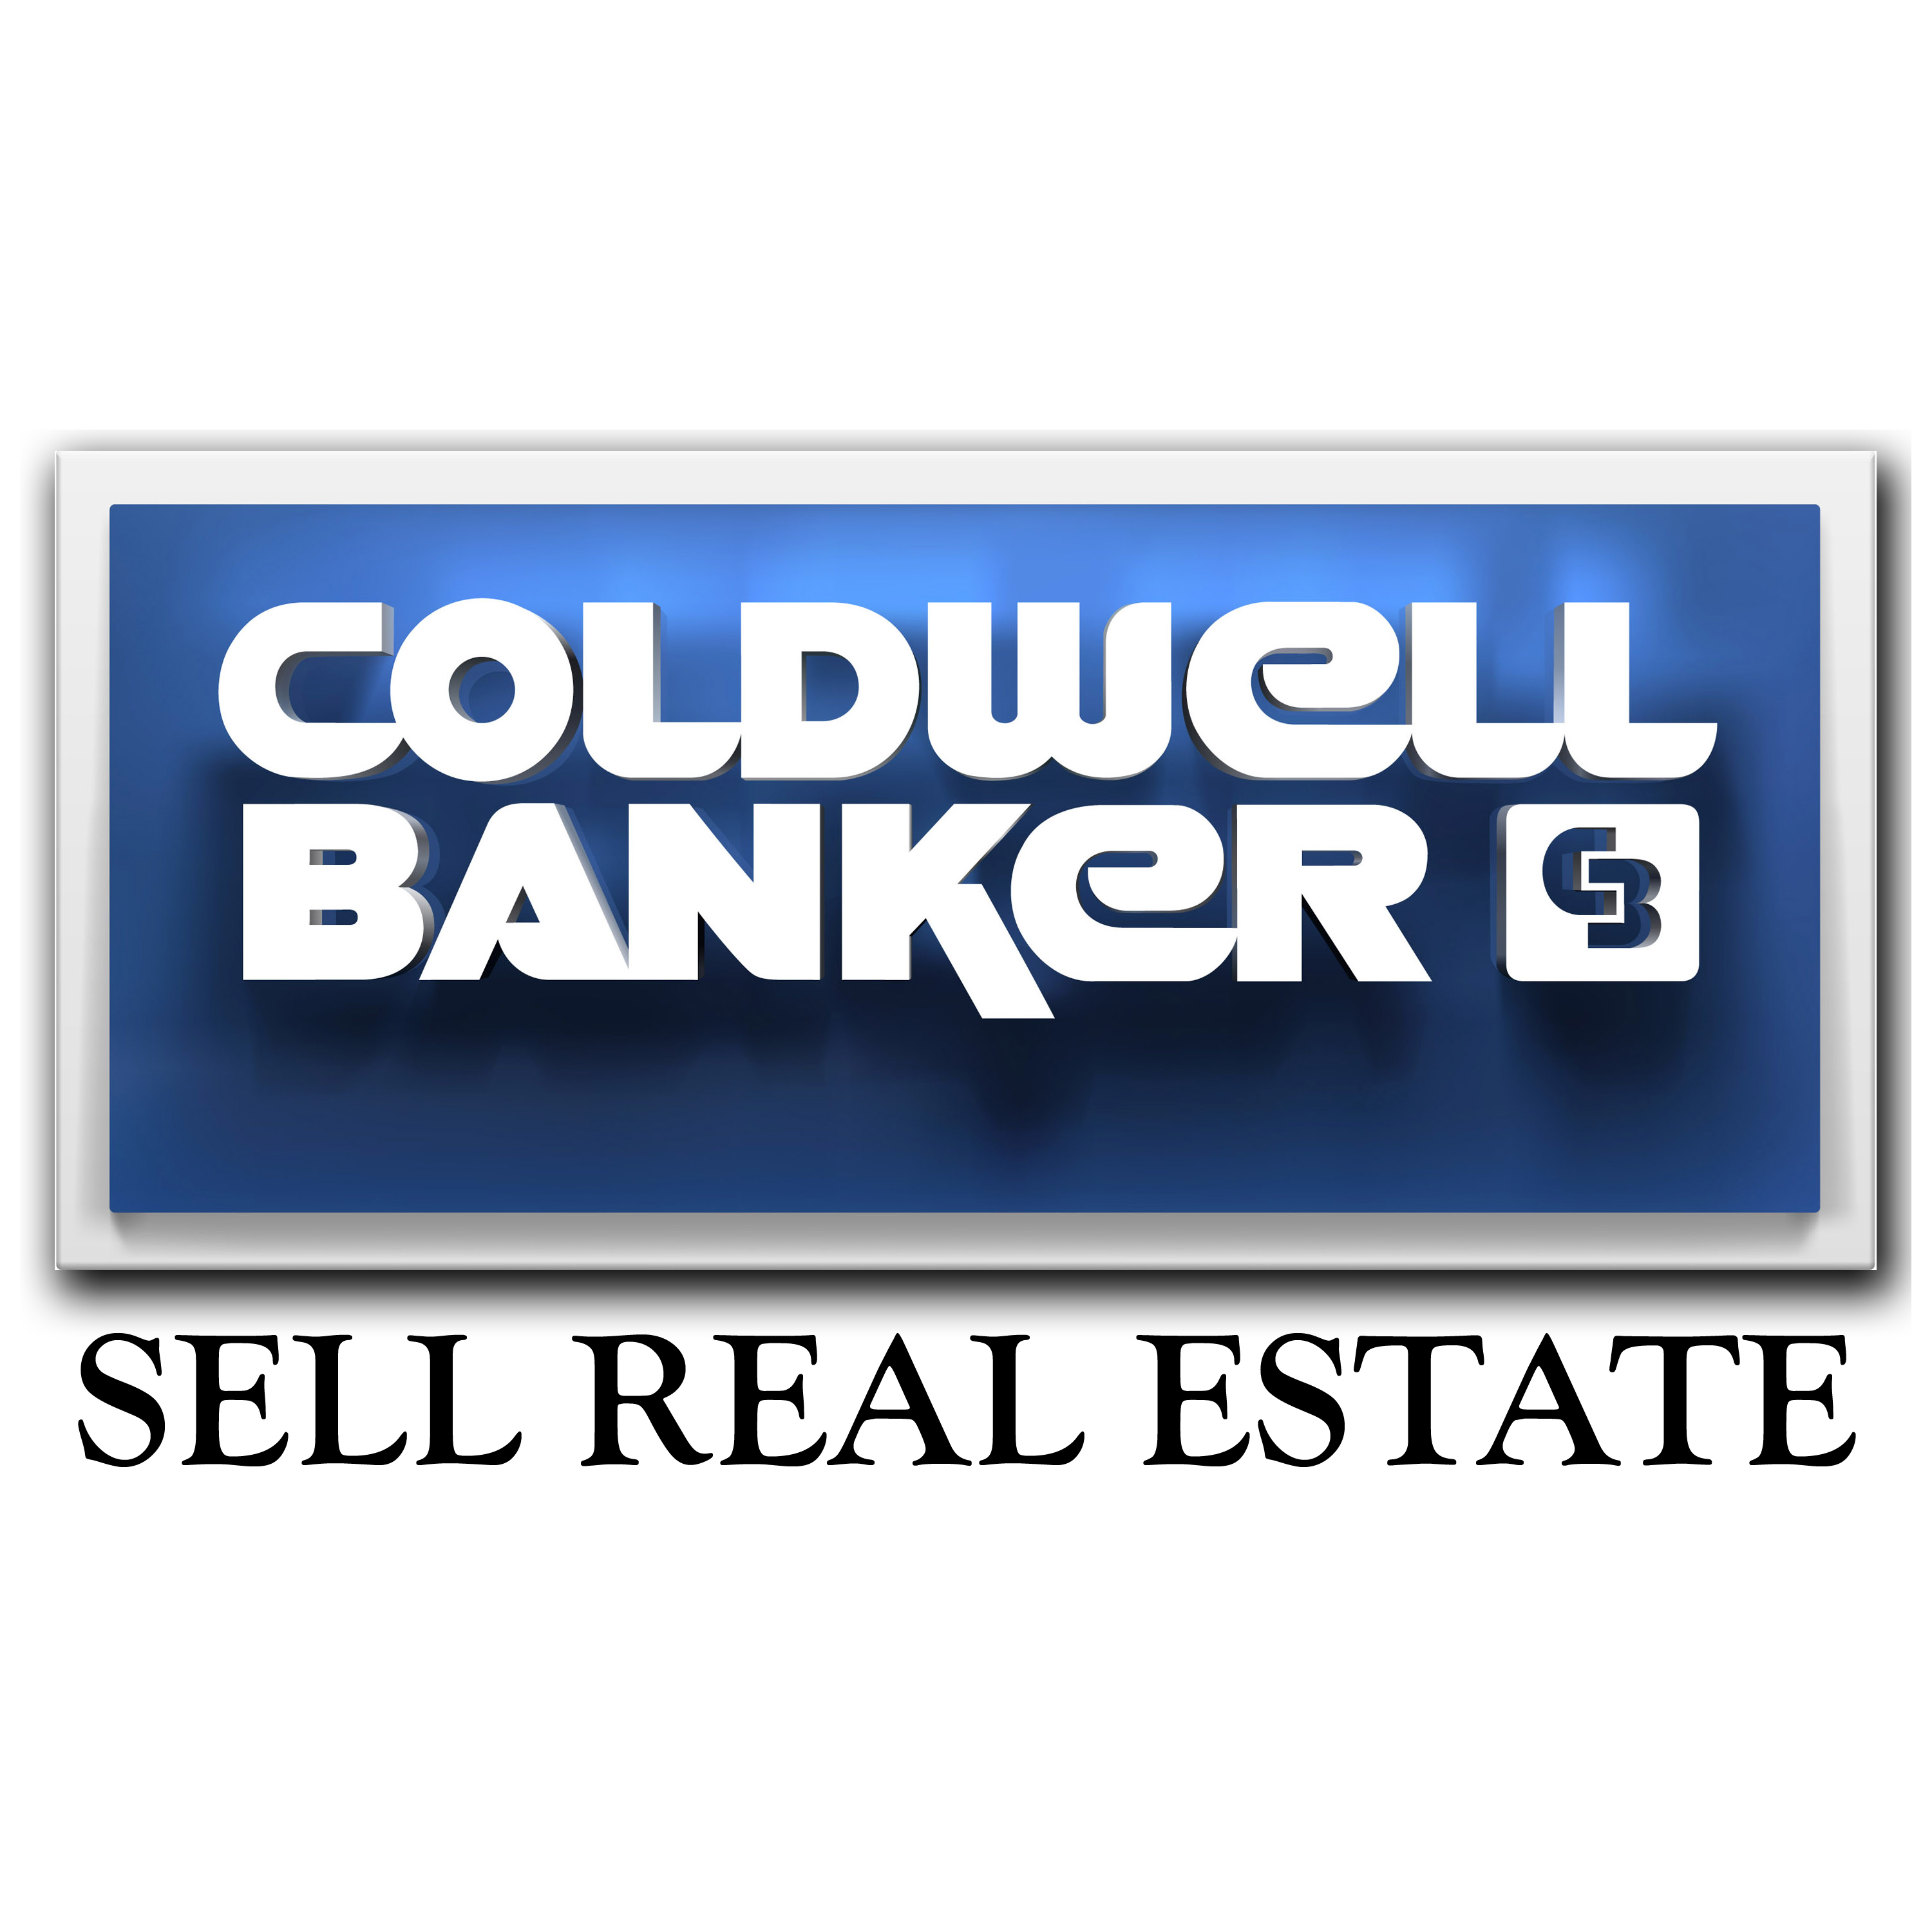 Coldwell Banker Sell Real Estate | 4000 10th St, Great Bend, KS, 67530 | +1 (620) 792-2566